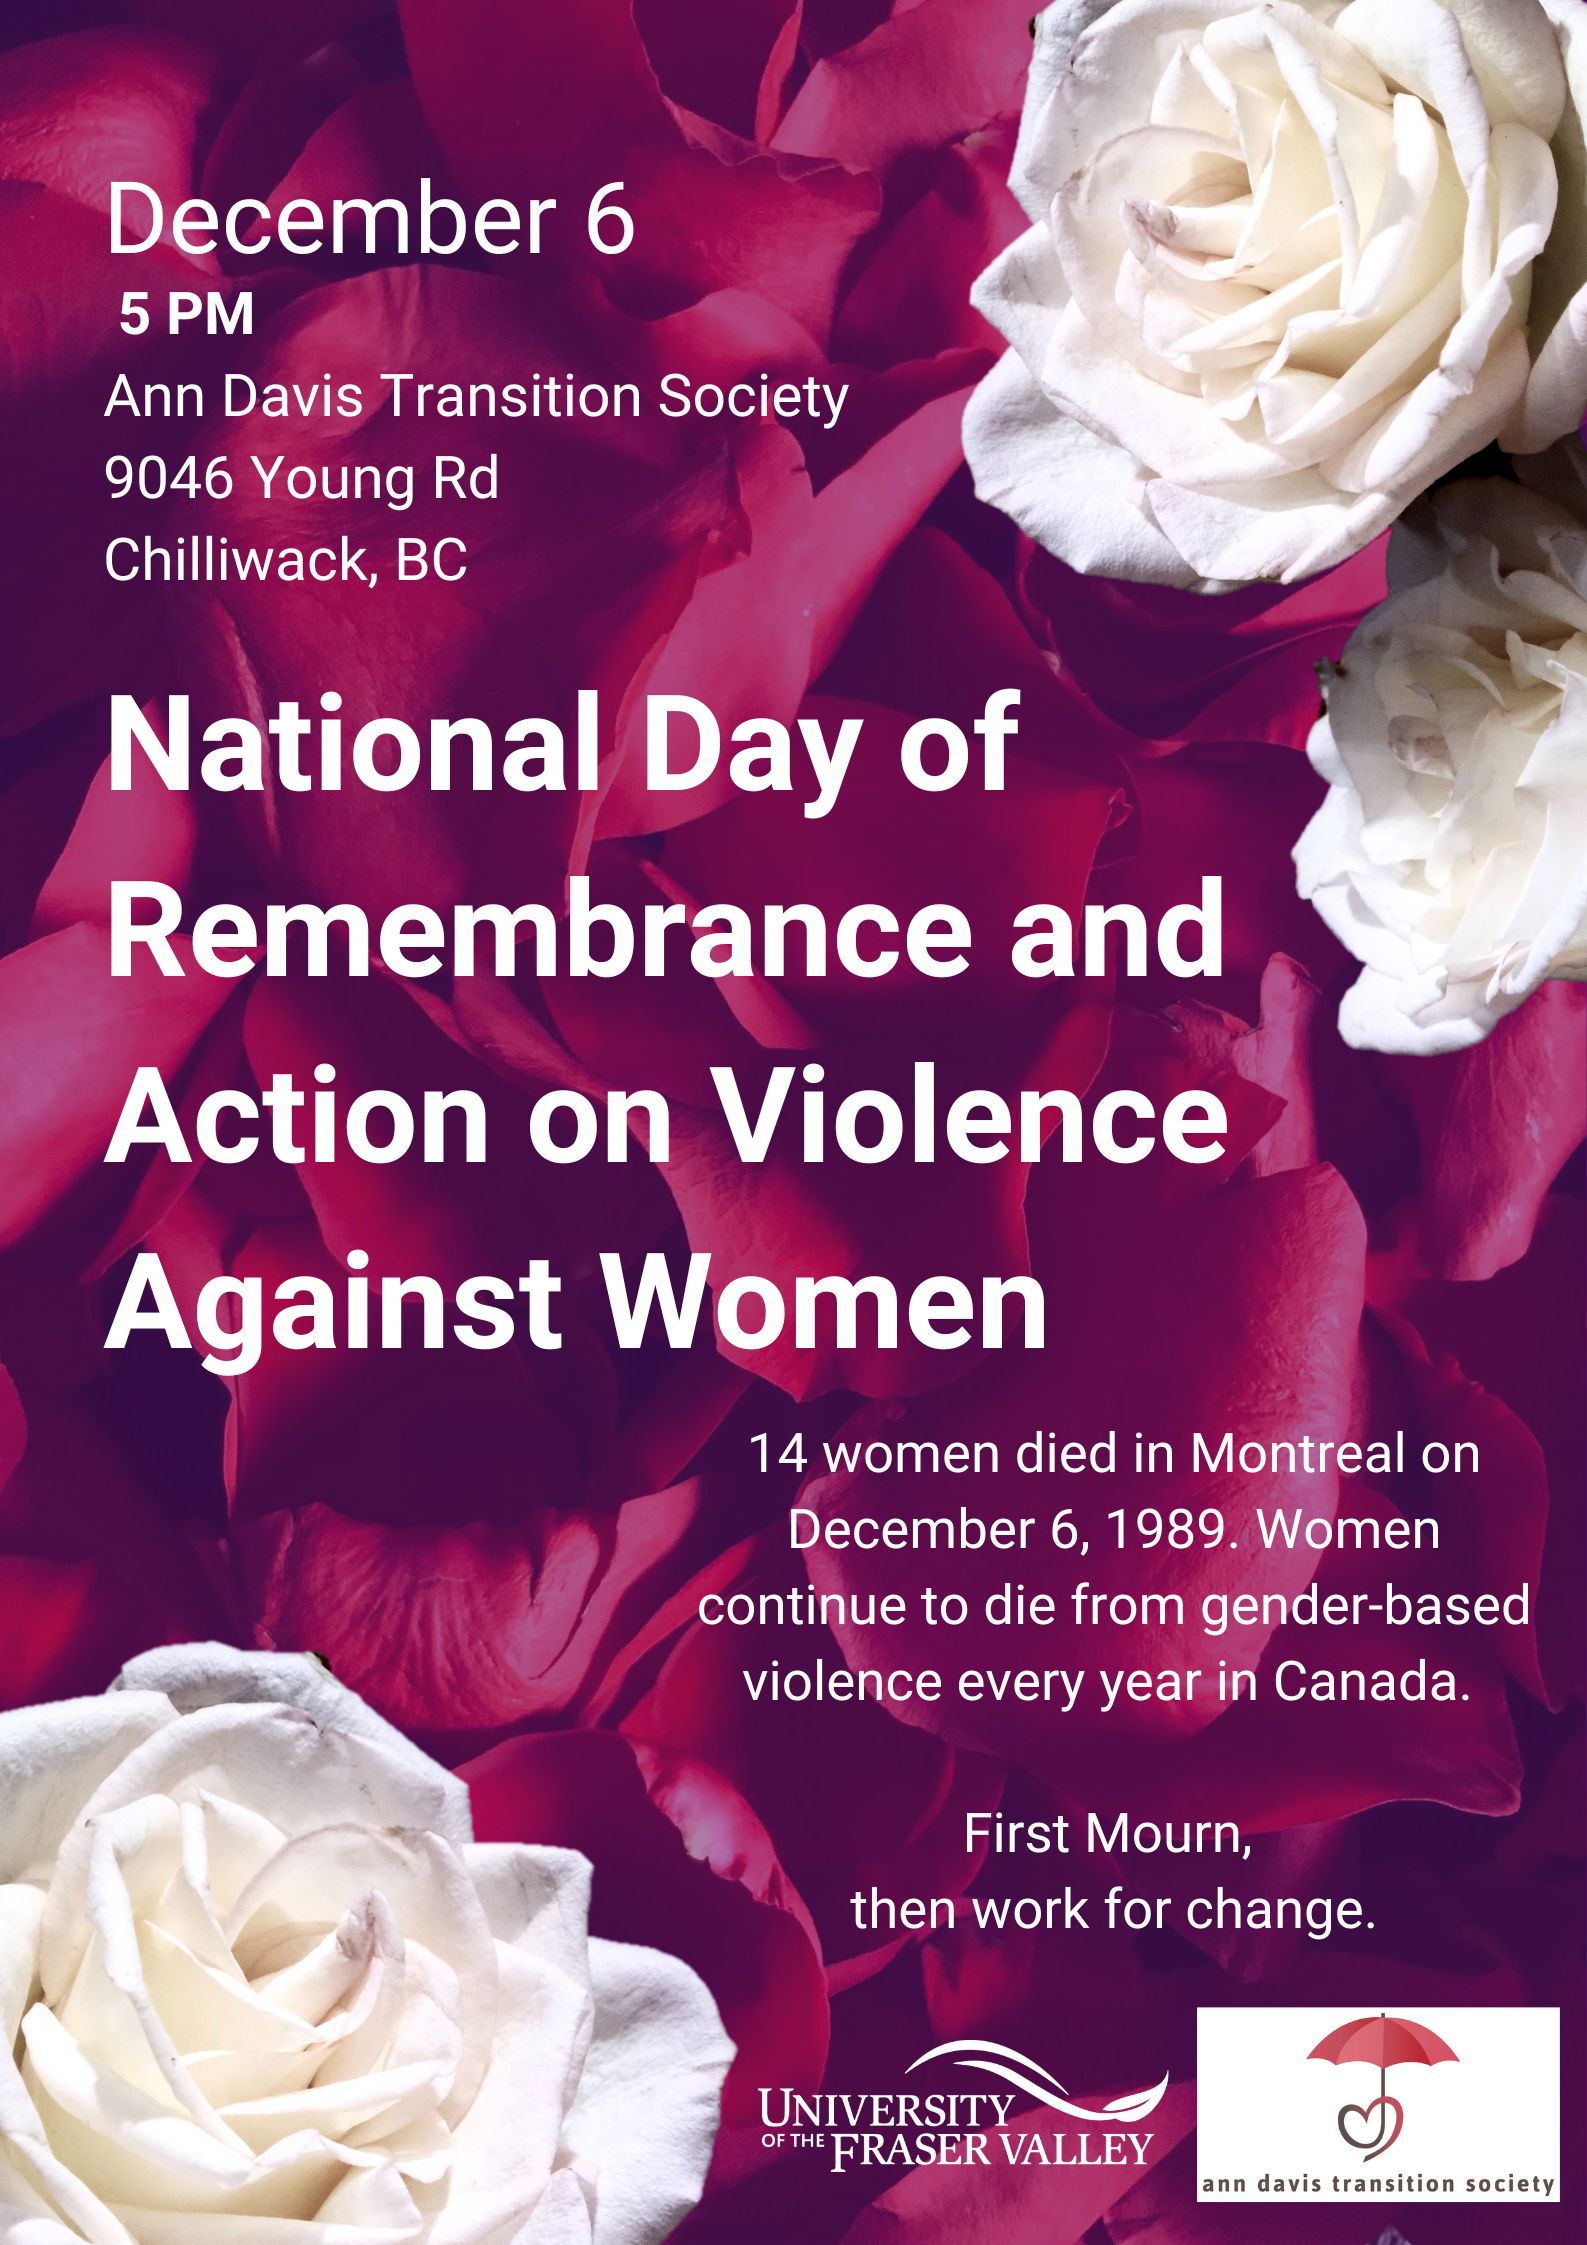 Candlelit Vigil (Chilliwack) - National Day of Awareness and Action on Violence Against Women